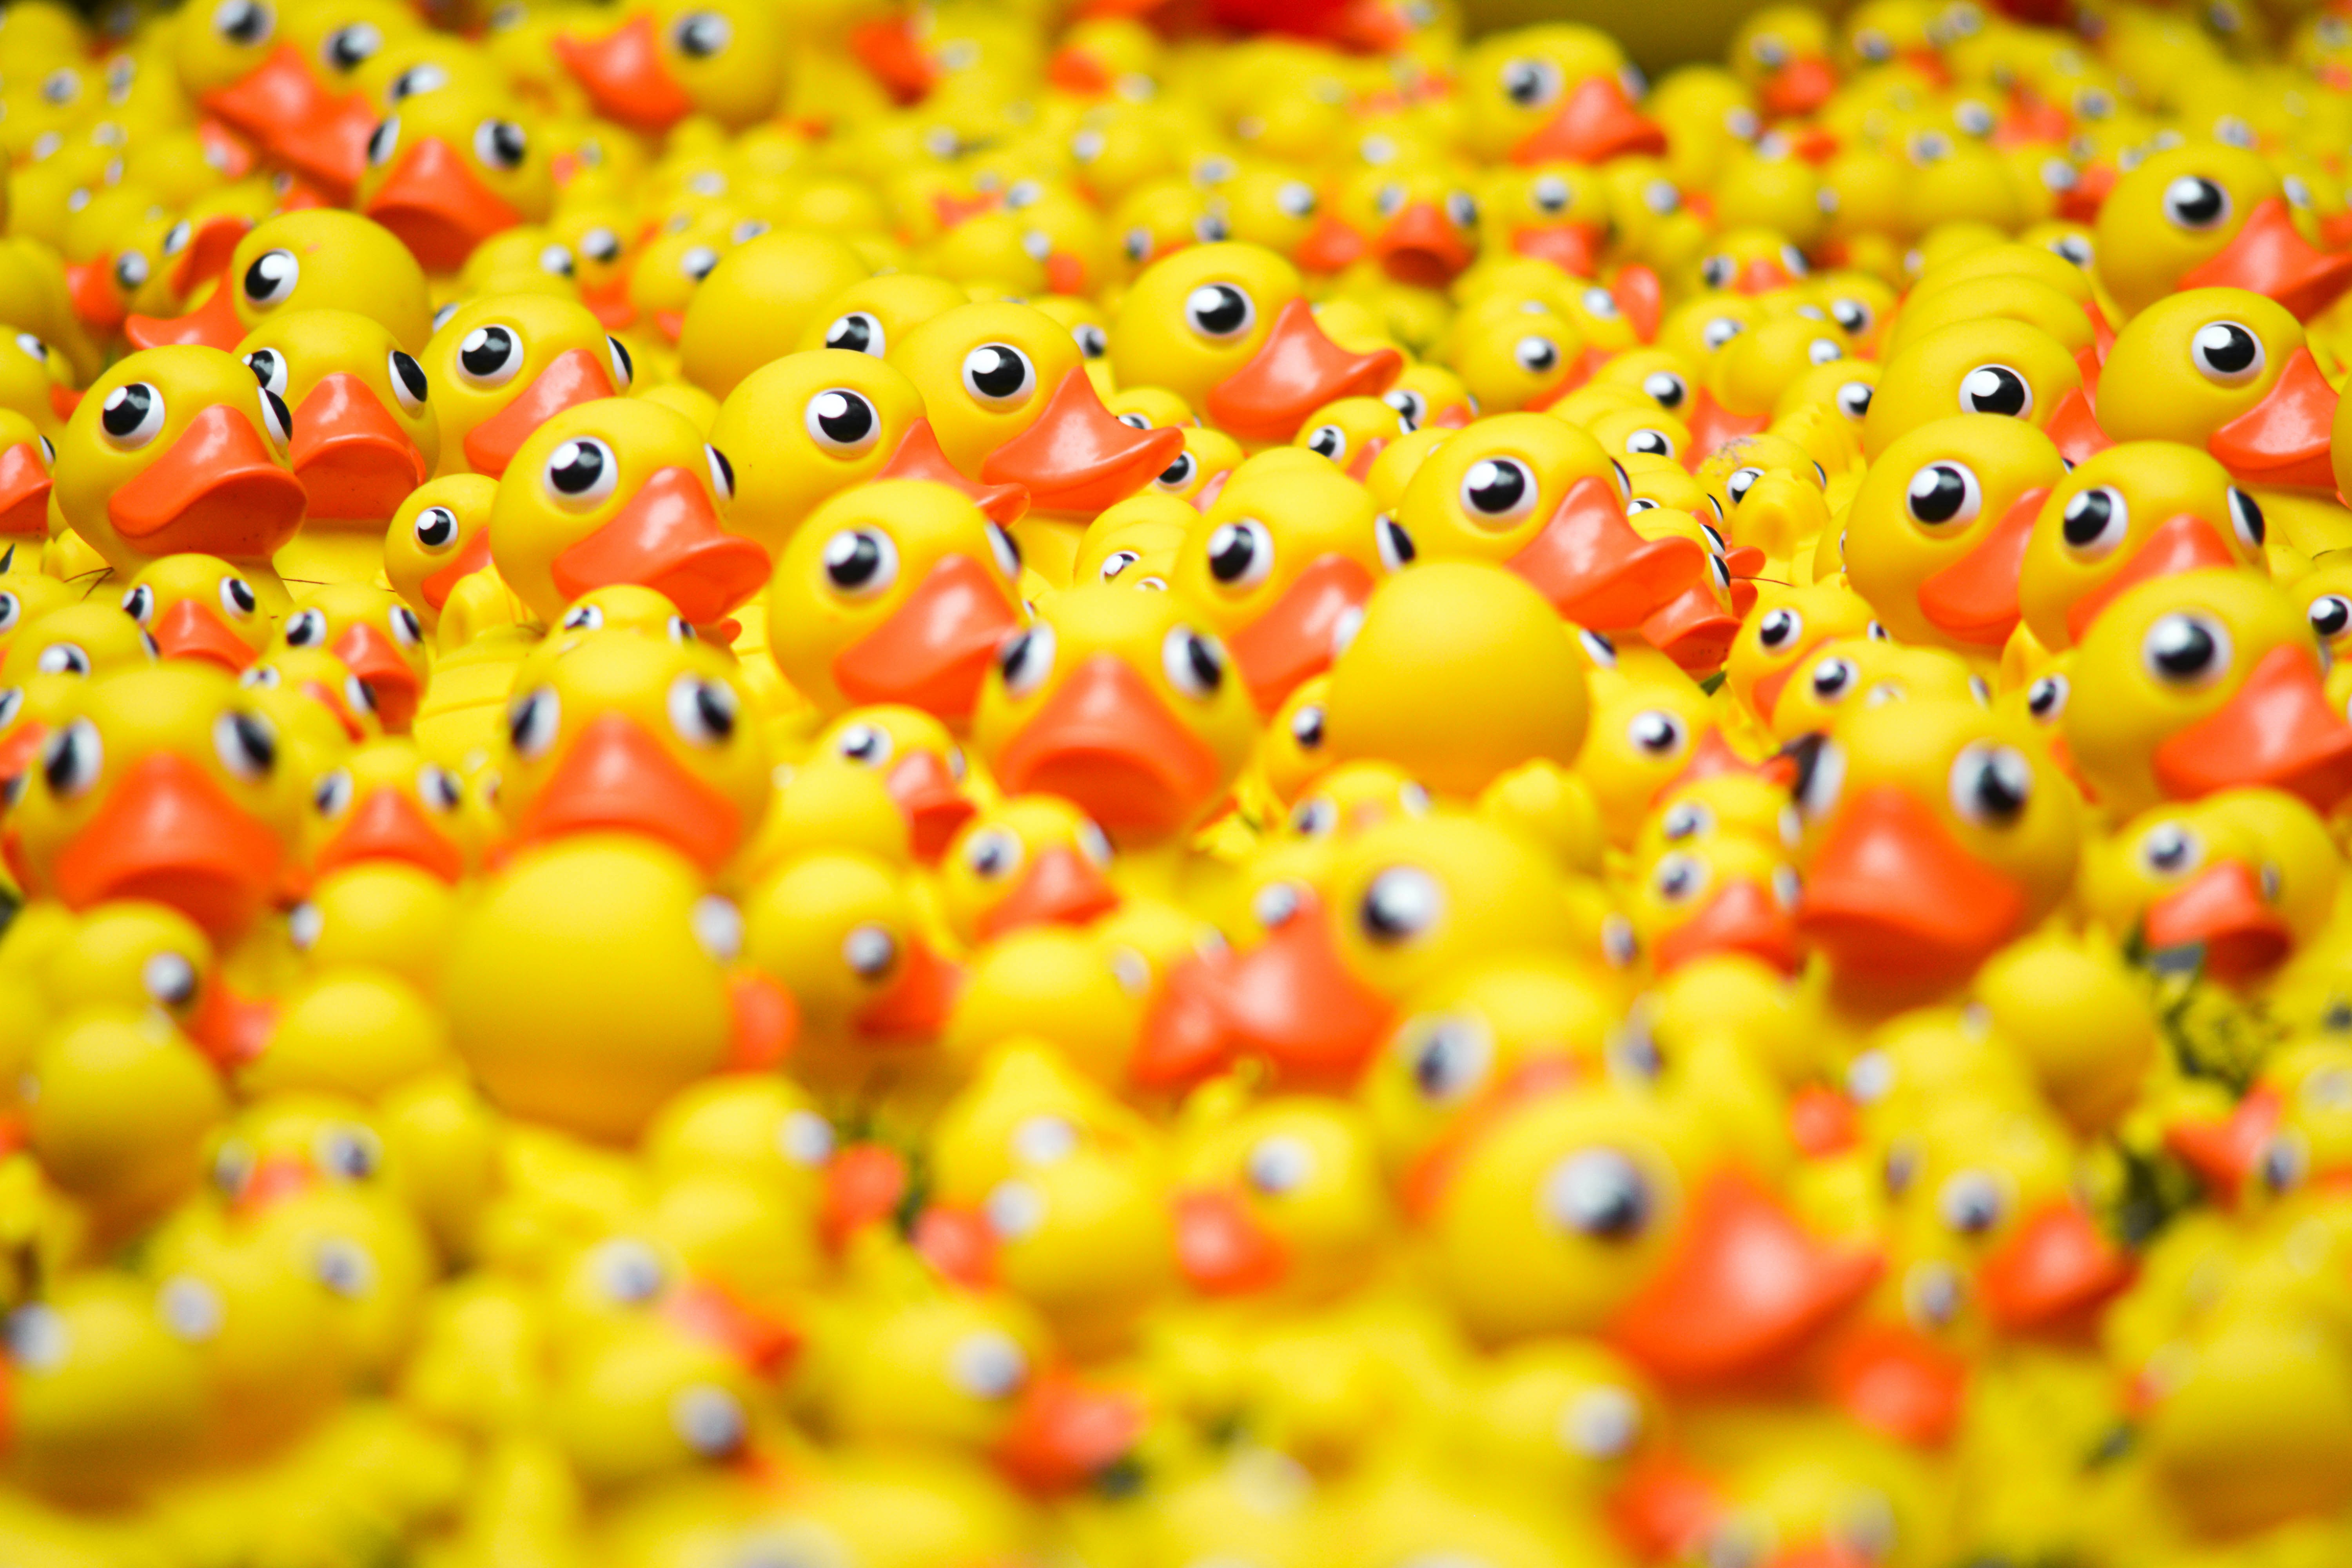 Plans underway for a quacking rubber duck race on Queanbeyan River next year